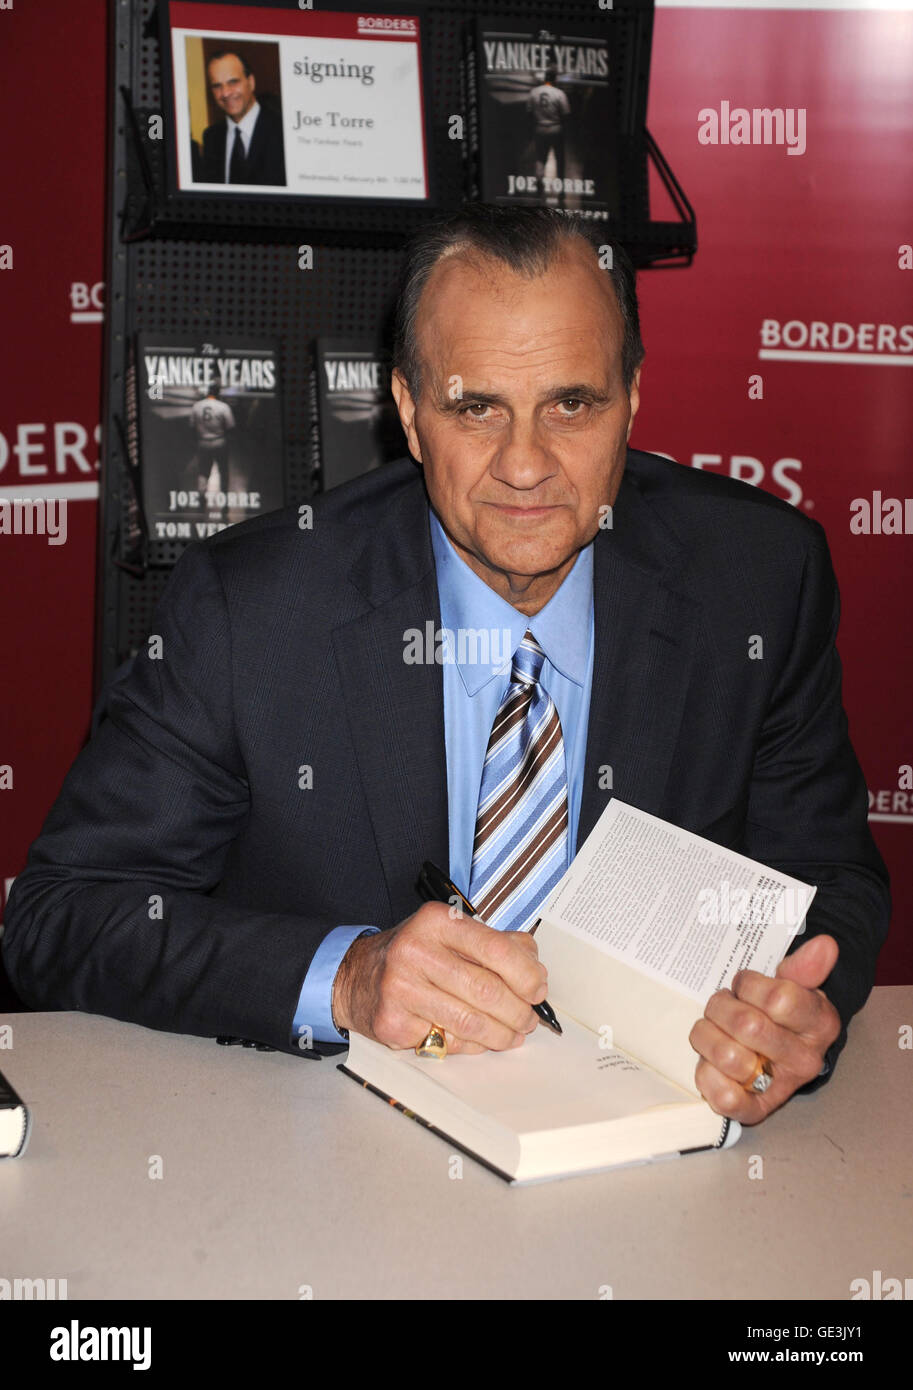 Former Yankees Manager Joe Torre At The Signing Of His New Book Joe 